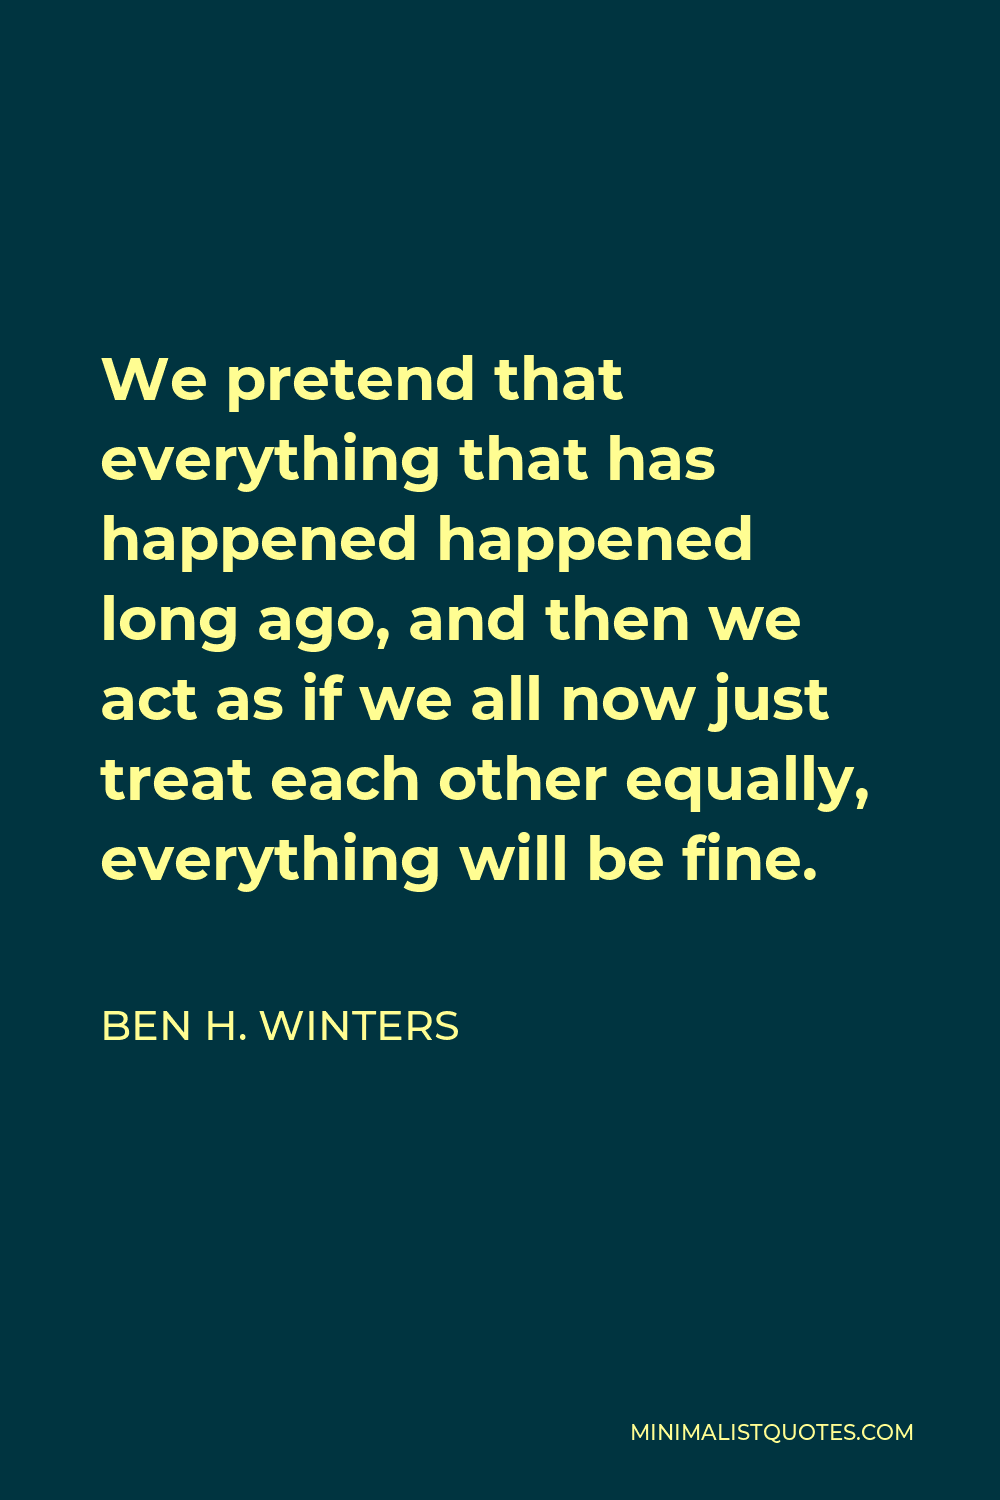 Ben H. Winters Quote - We pretend that everything that has happened happened long ago, and then we act as if we all now just treat each other equally, everything will be fine.